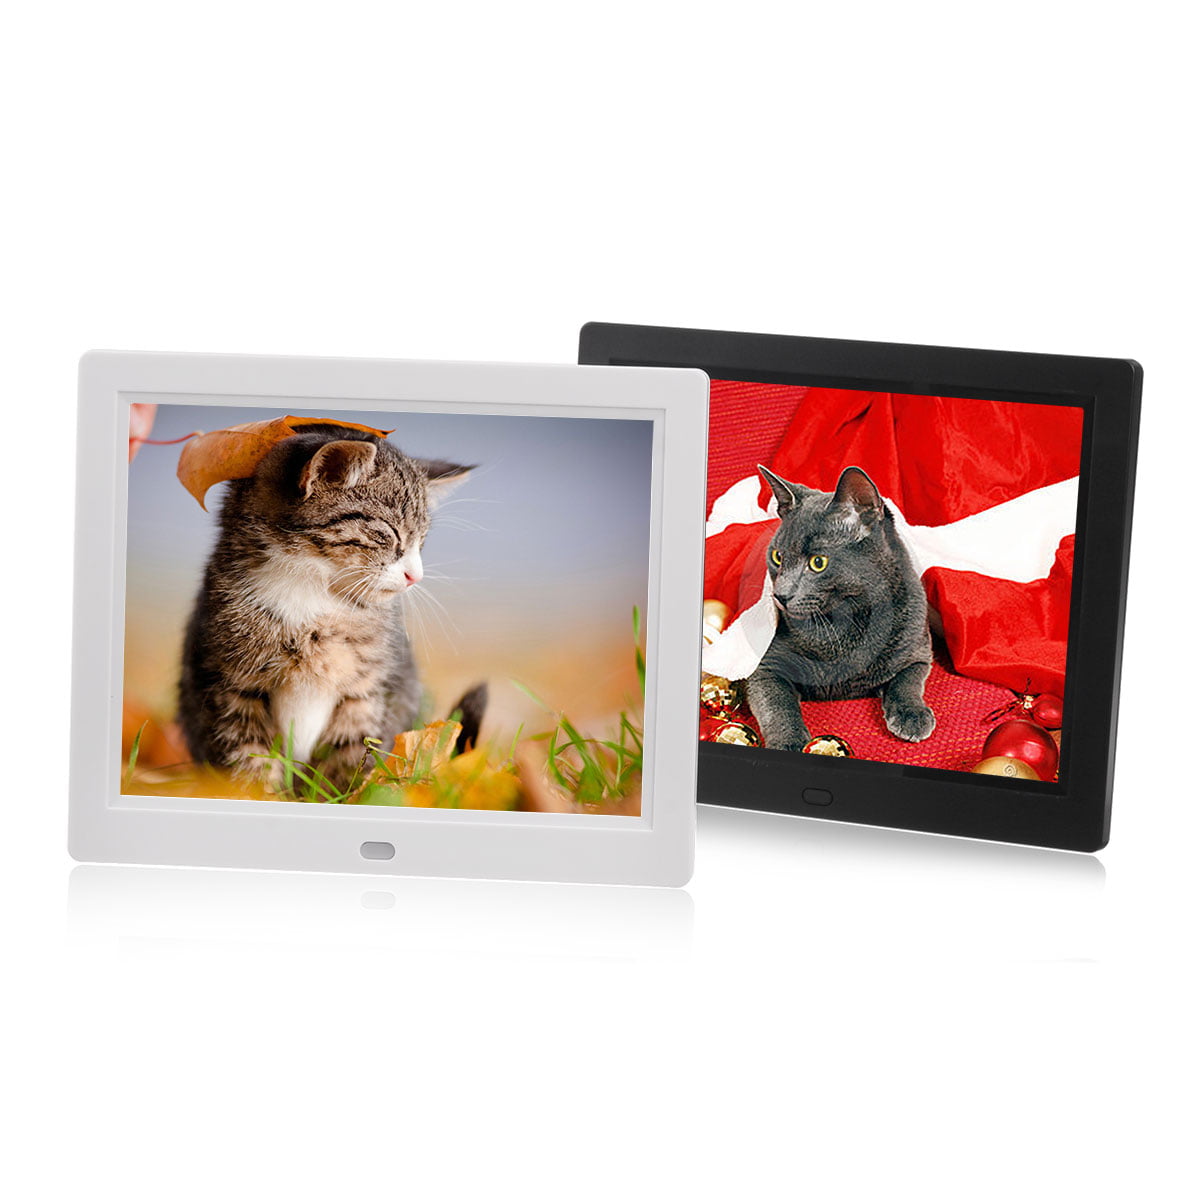 APEMAN Digital Photo Frame 8 Inch with 1280x800 High Resolution USB and SD Card Slots and Remote Control Support 1080P Video Motion Sensor Photo Auto-Rotate Background Music 